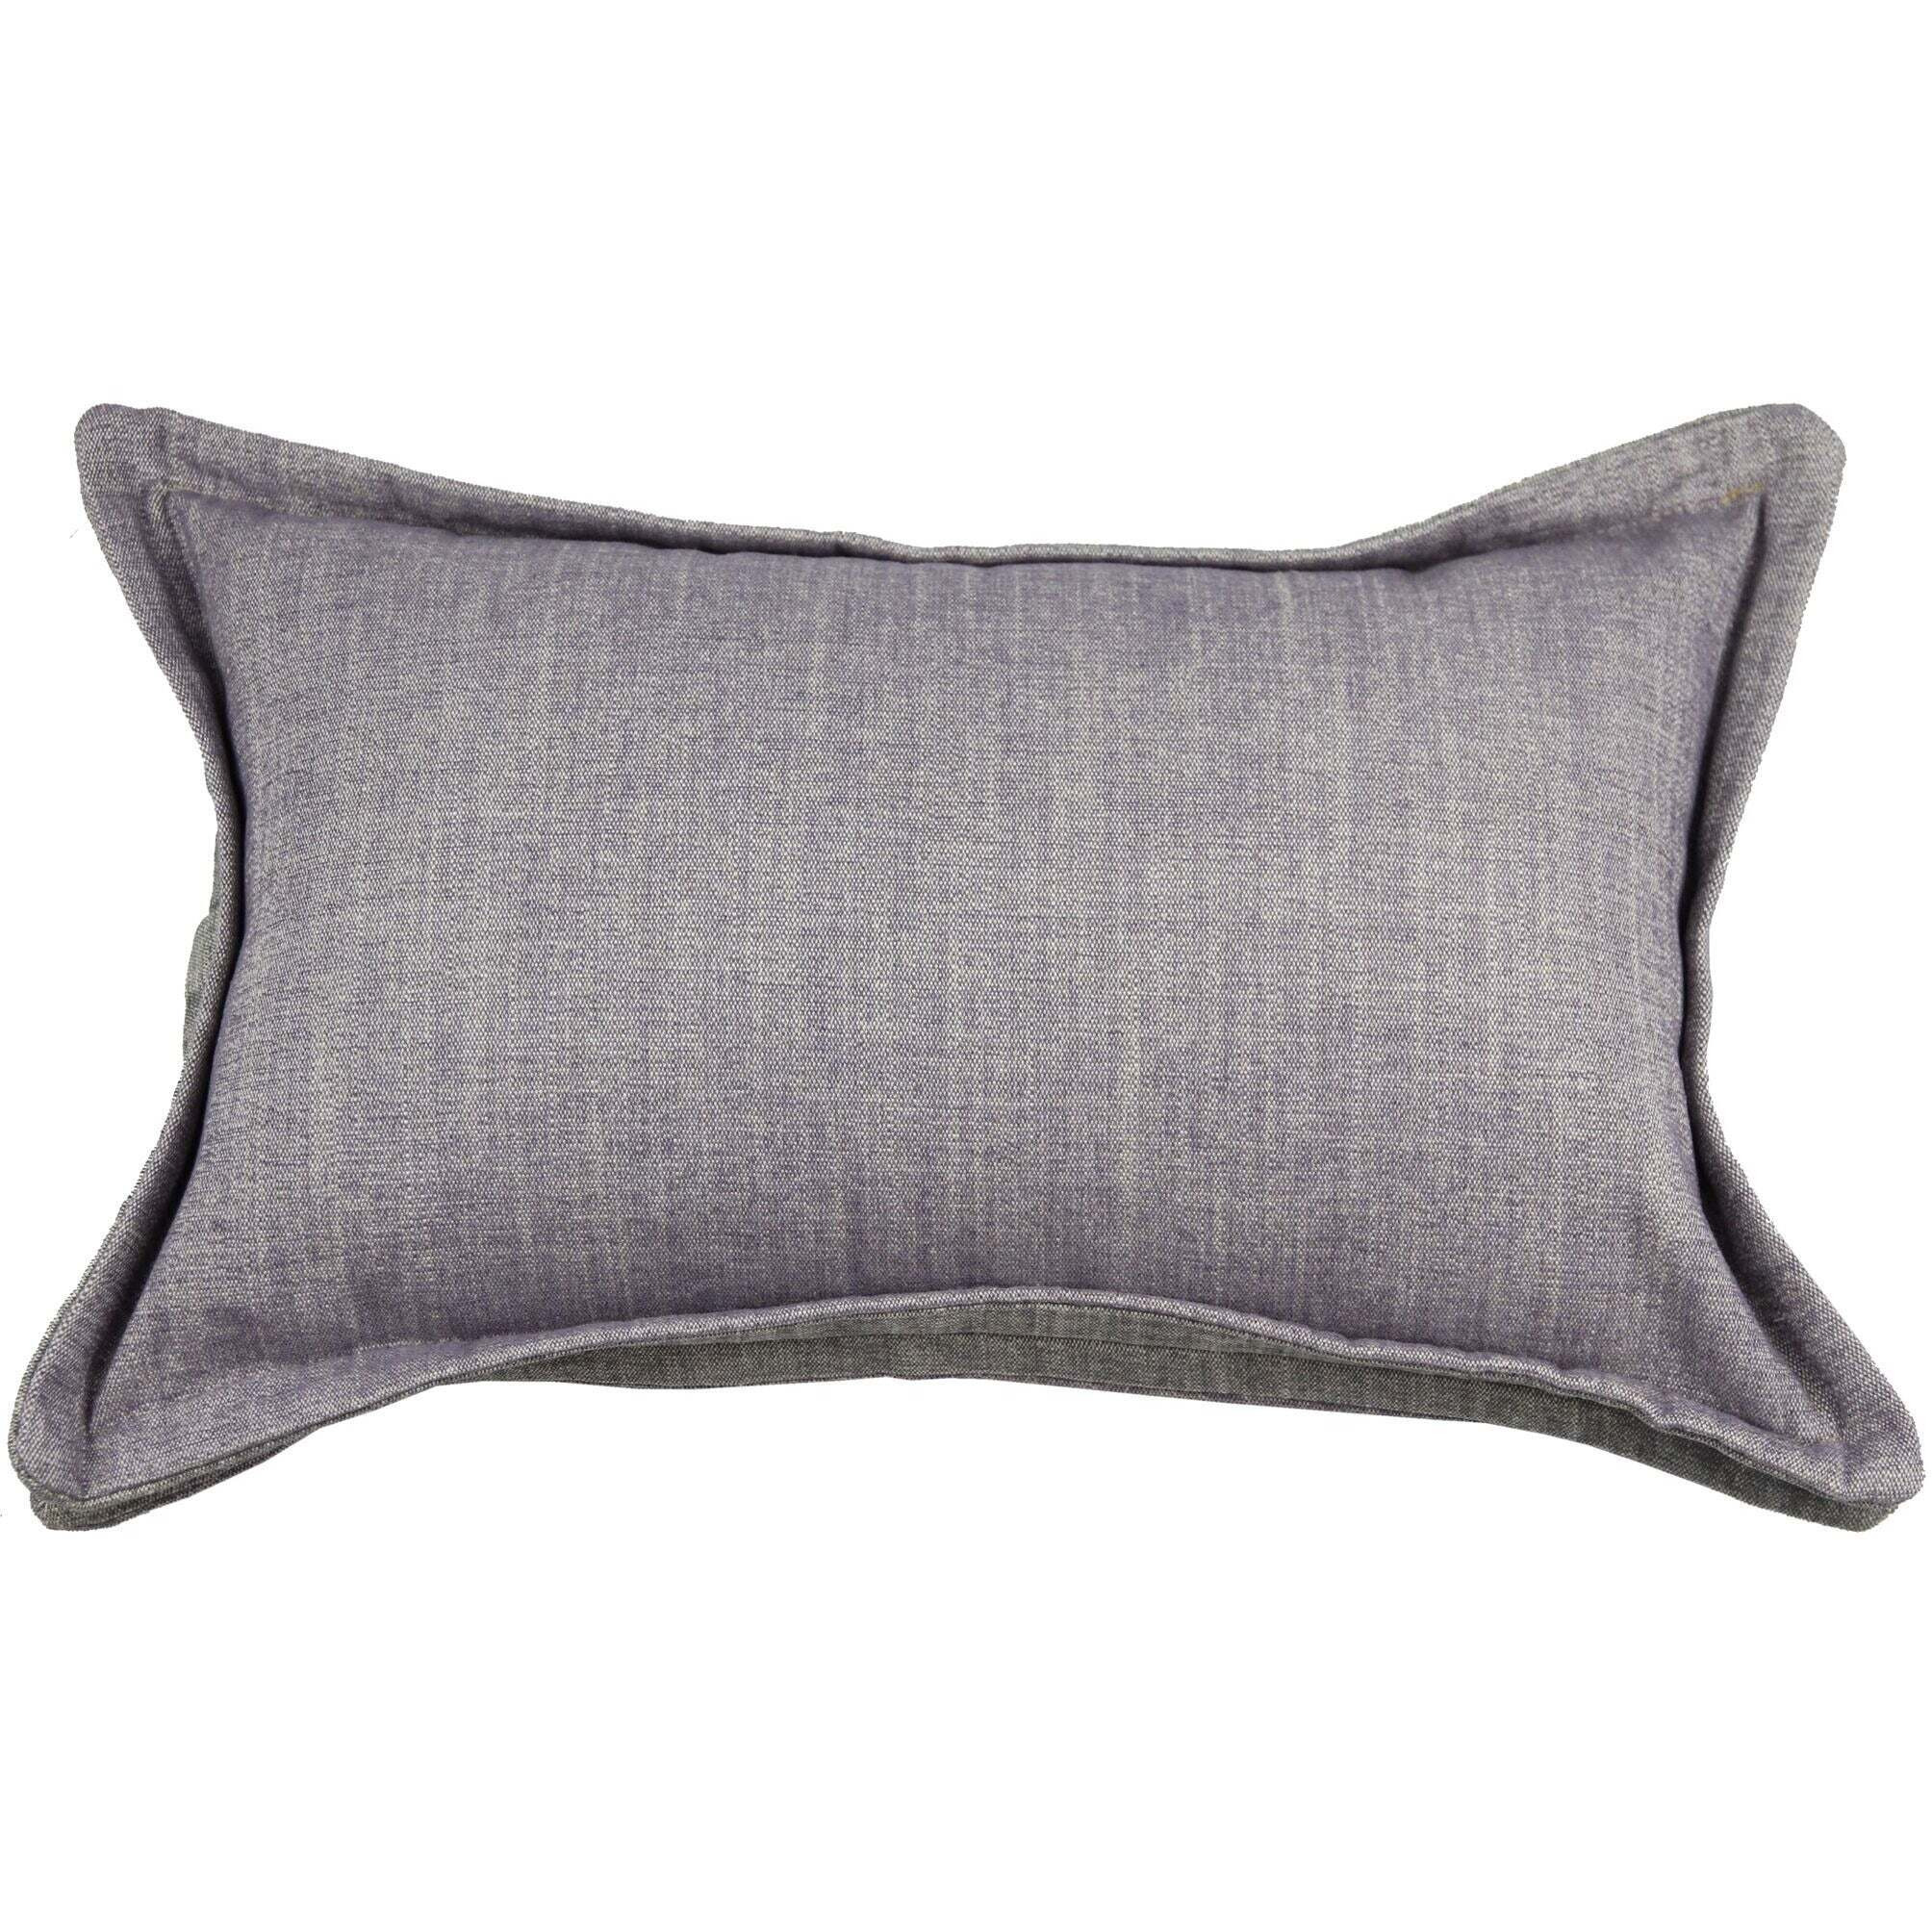 Rhumba Accent Lilac Purple + Grey Pillow, Cover Only / 50cm x 30cm